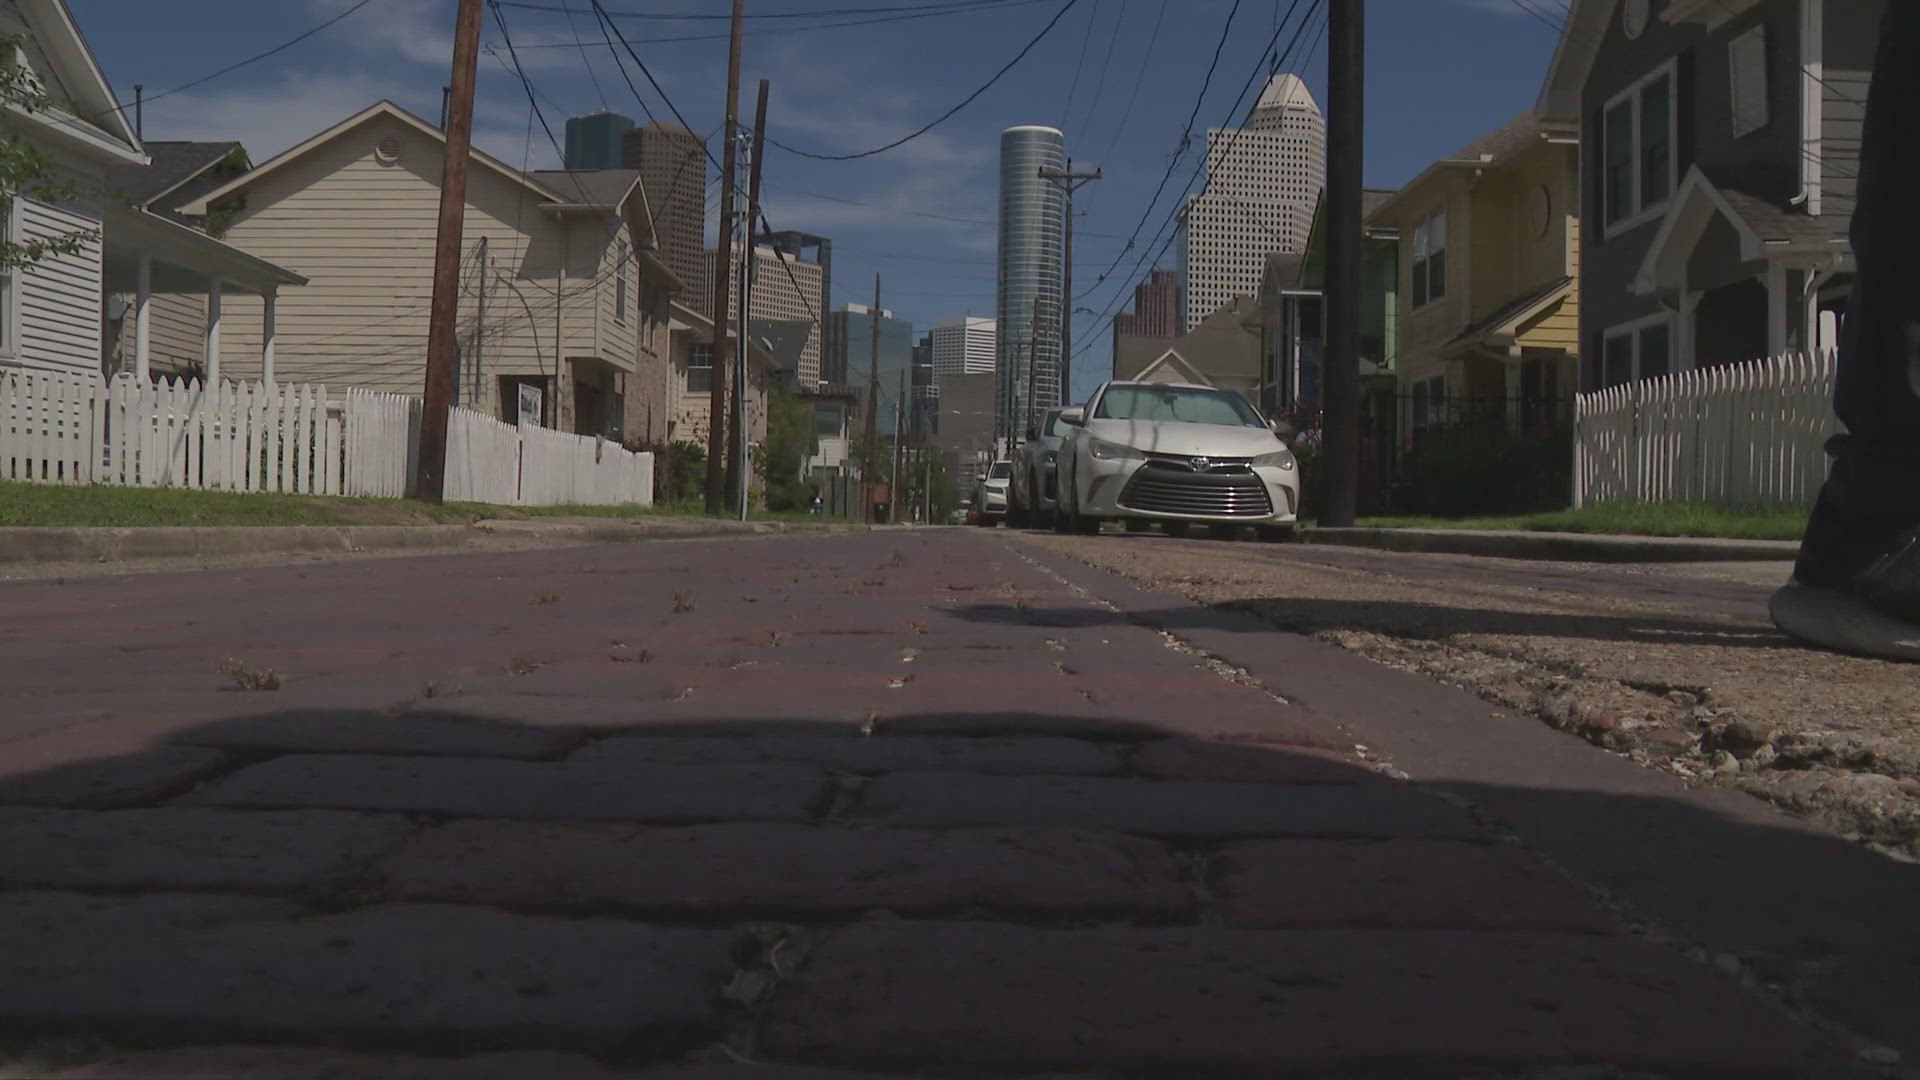 Houston Mayor John Whitmire is working with community groups to restore the historic brick-paved roads laid by free slaves in Freedmen's Town.